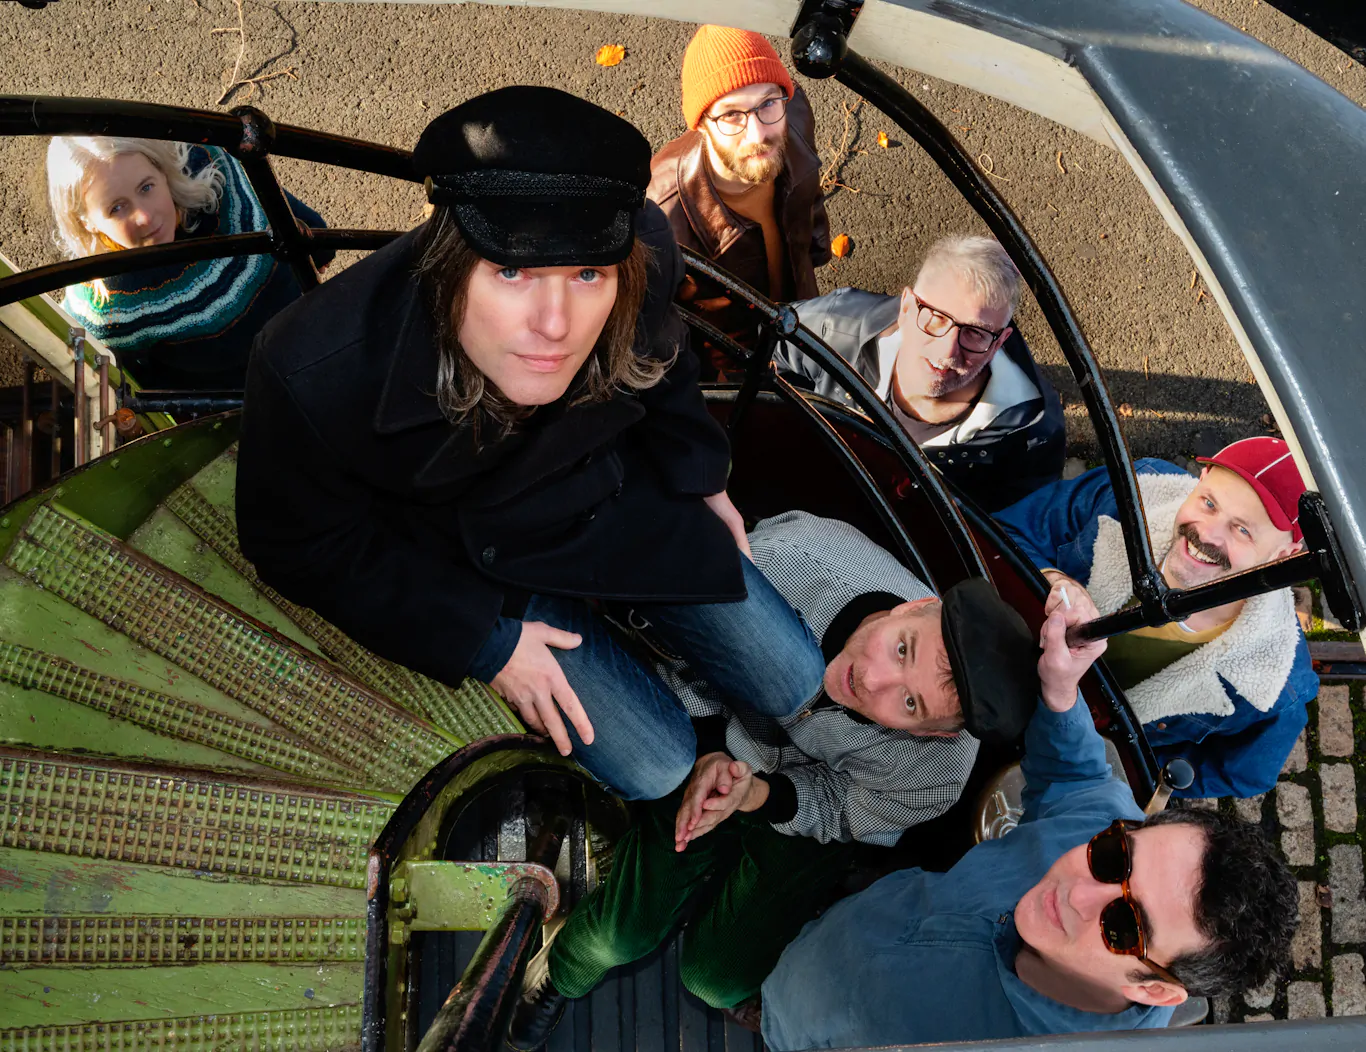 BELLE AND SEBASTIAN release standalone video and single 'A Bit Of Previous' 